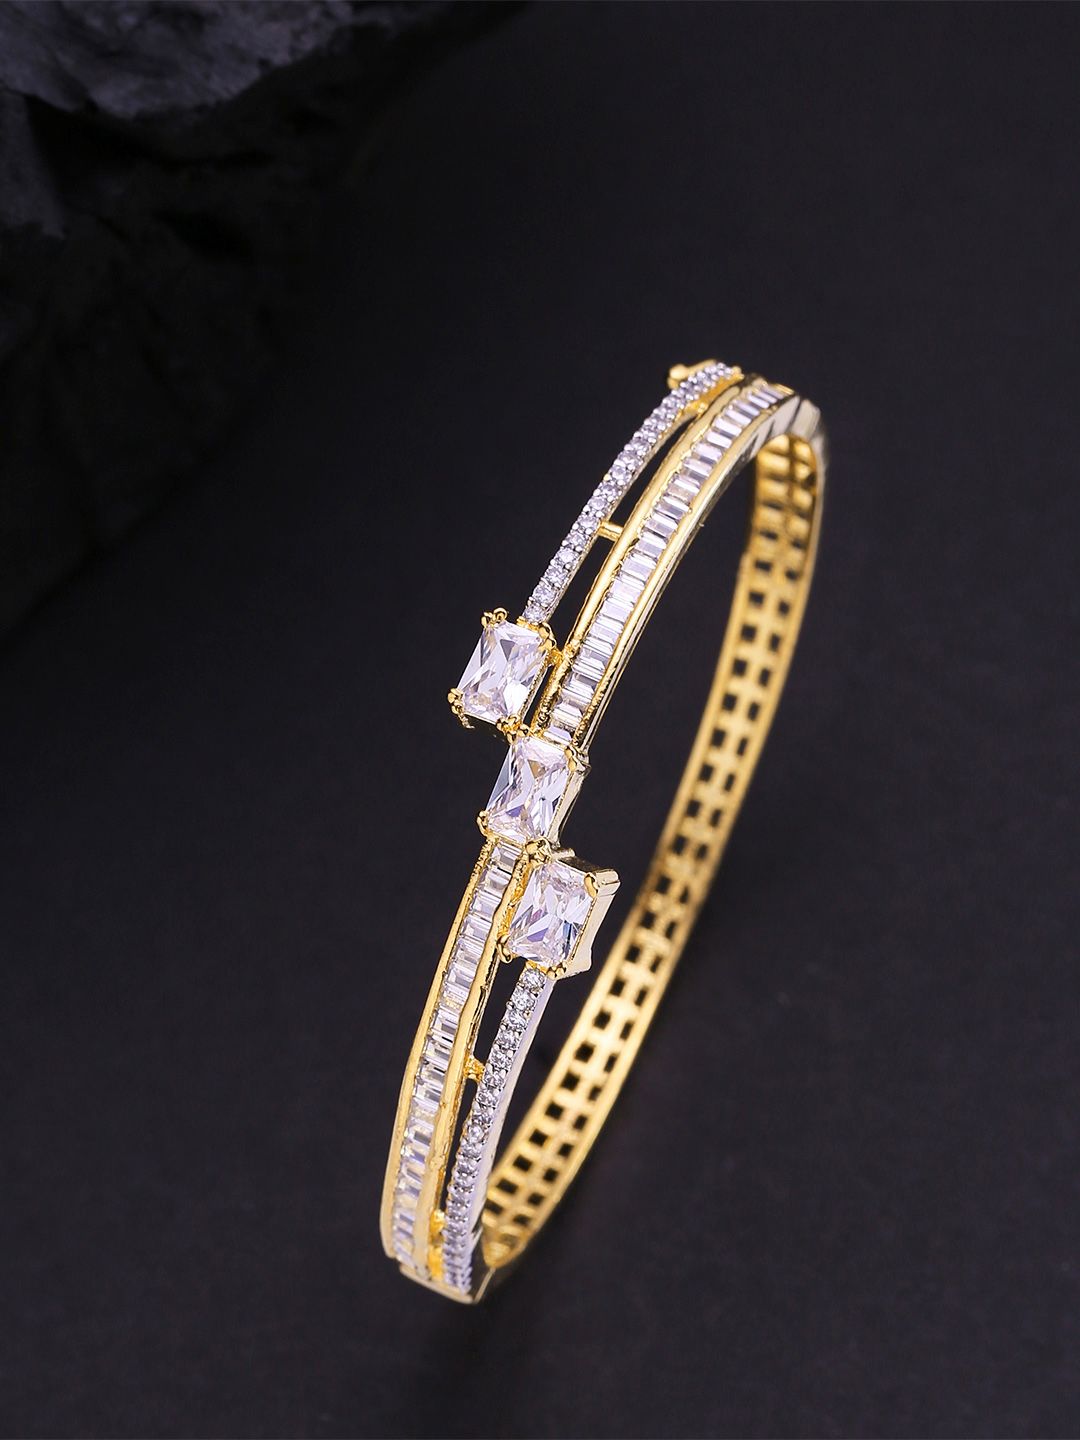 Priyaasi Gold-Plated Stone Studded Handcrafted Bangle Style Bracelet Price in India